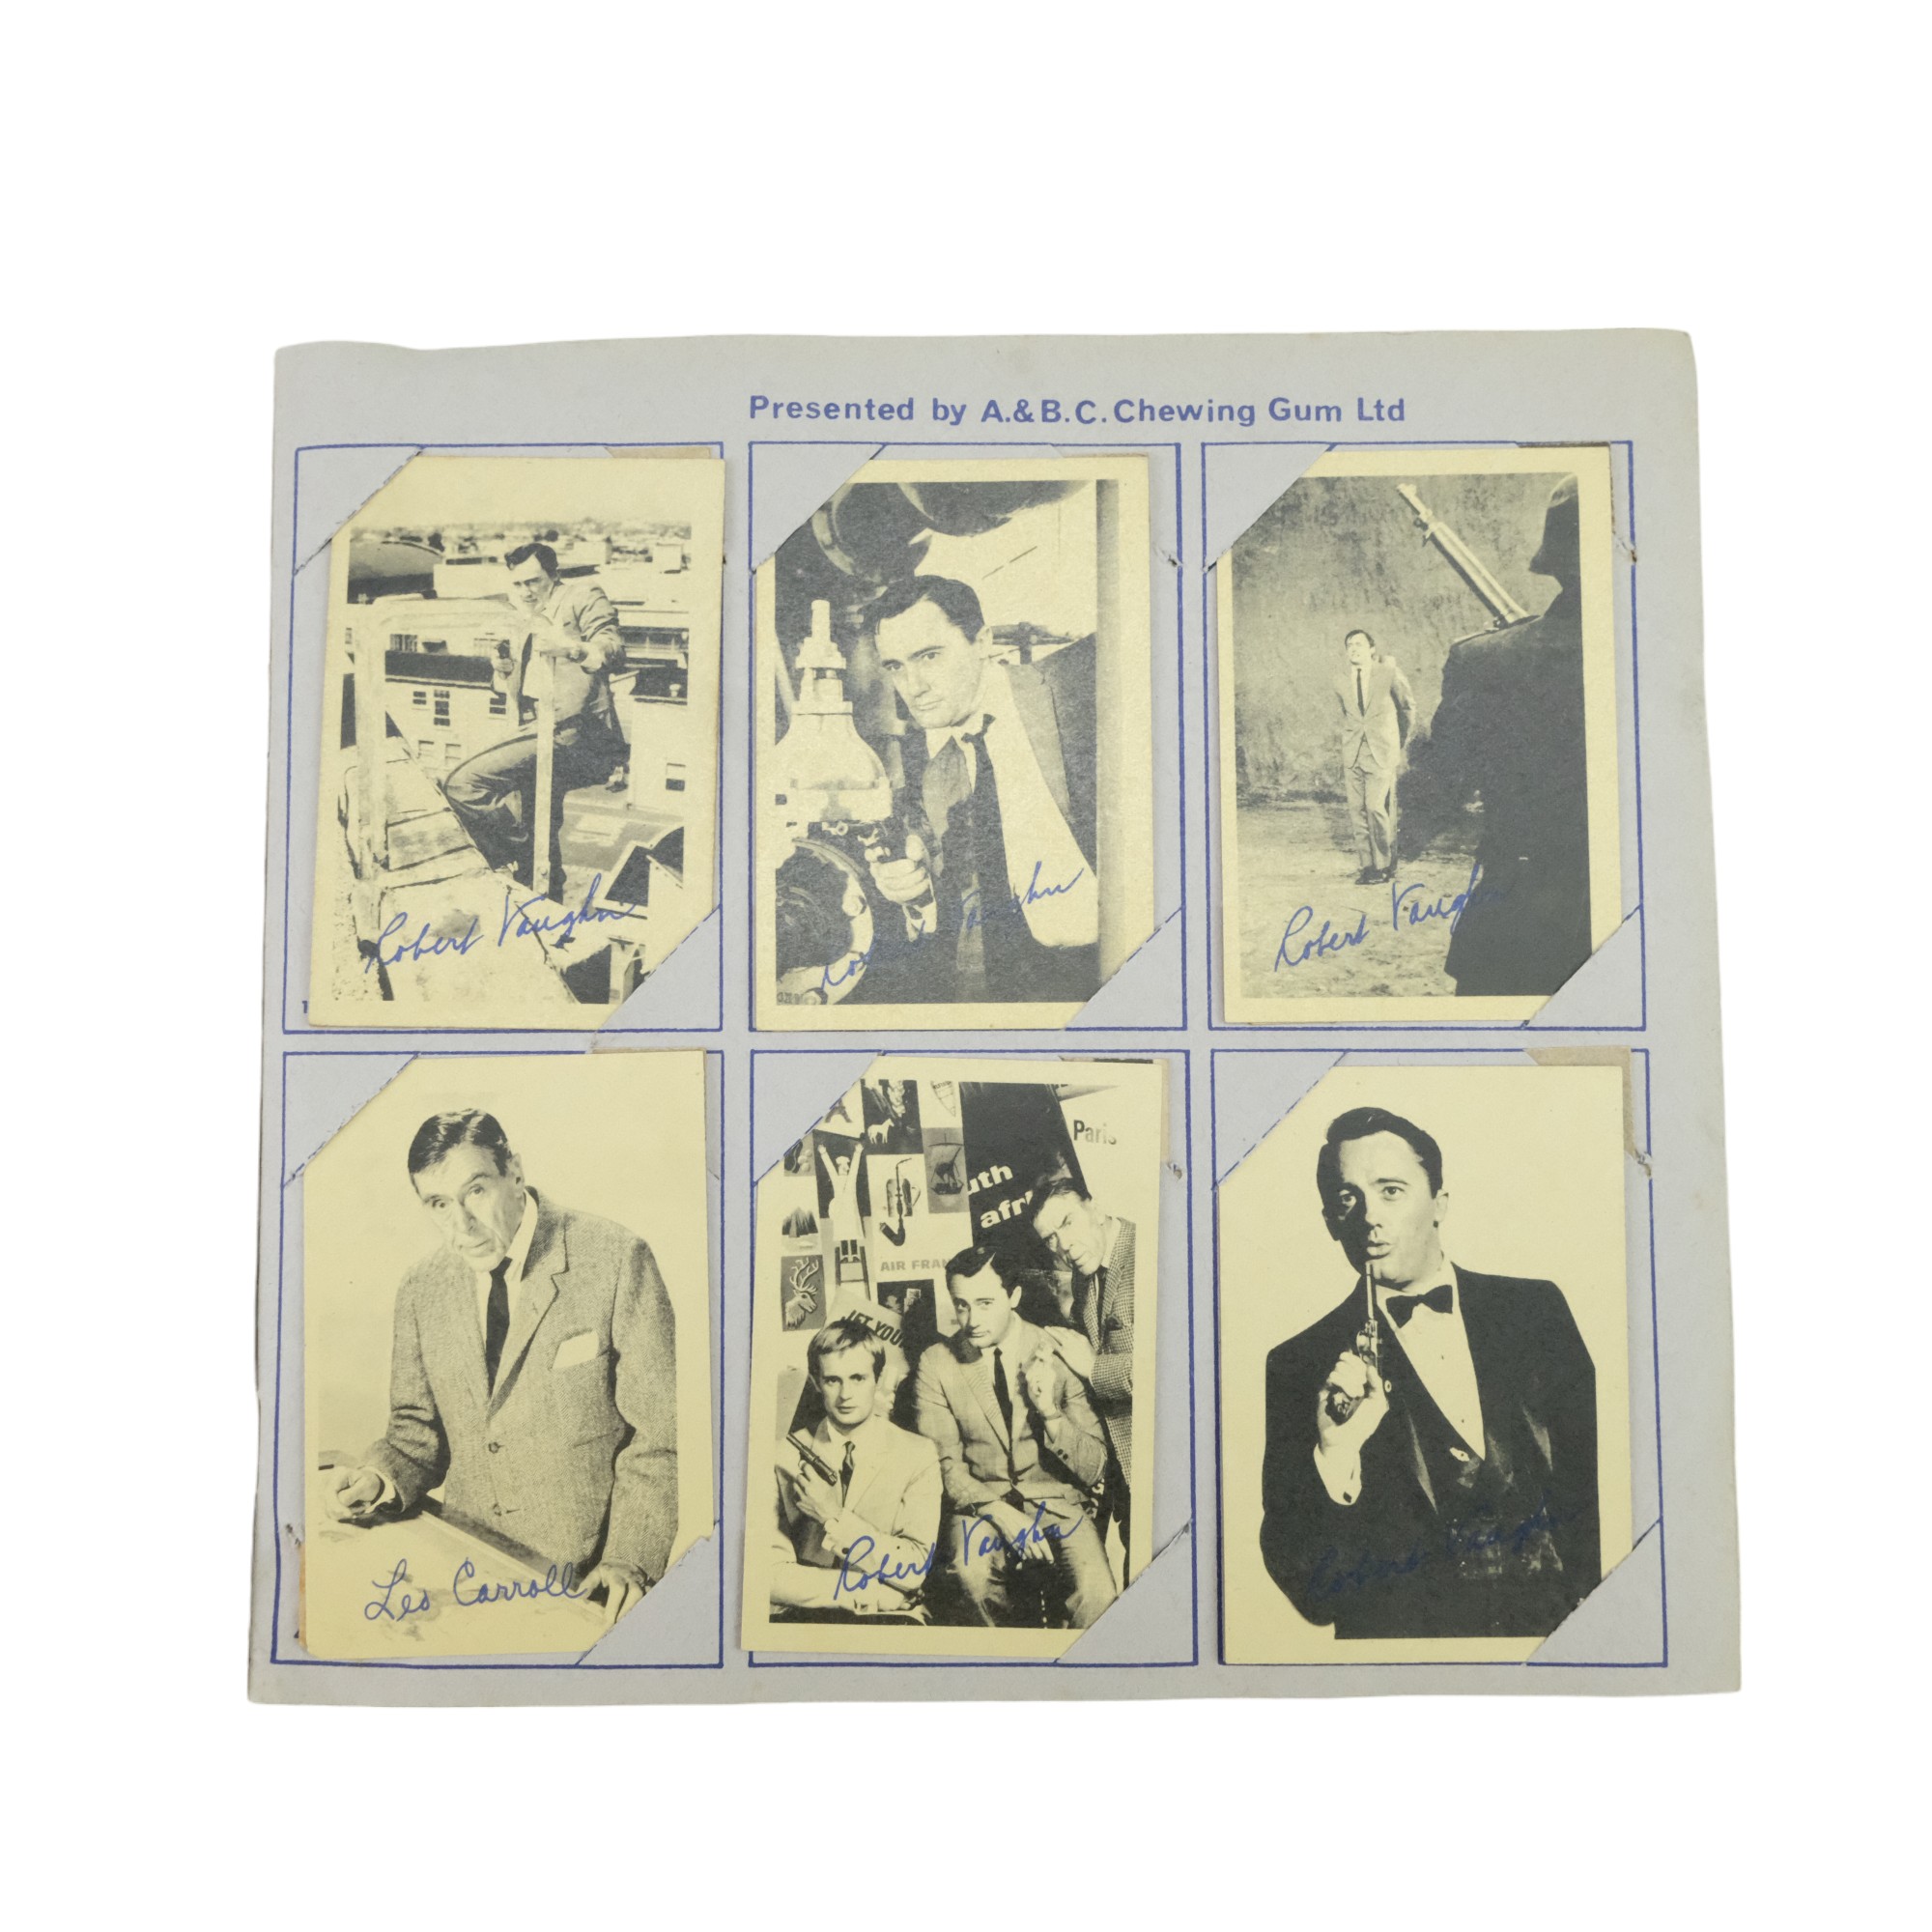 A complete album of 1965 A B & C Chewing Gum Ltd "The Man From U.N.C.L.E" confectionary cards - Image 3 of 8